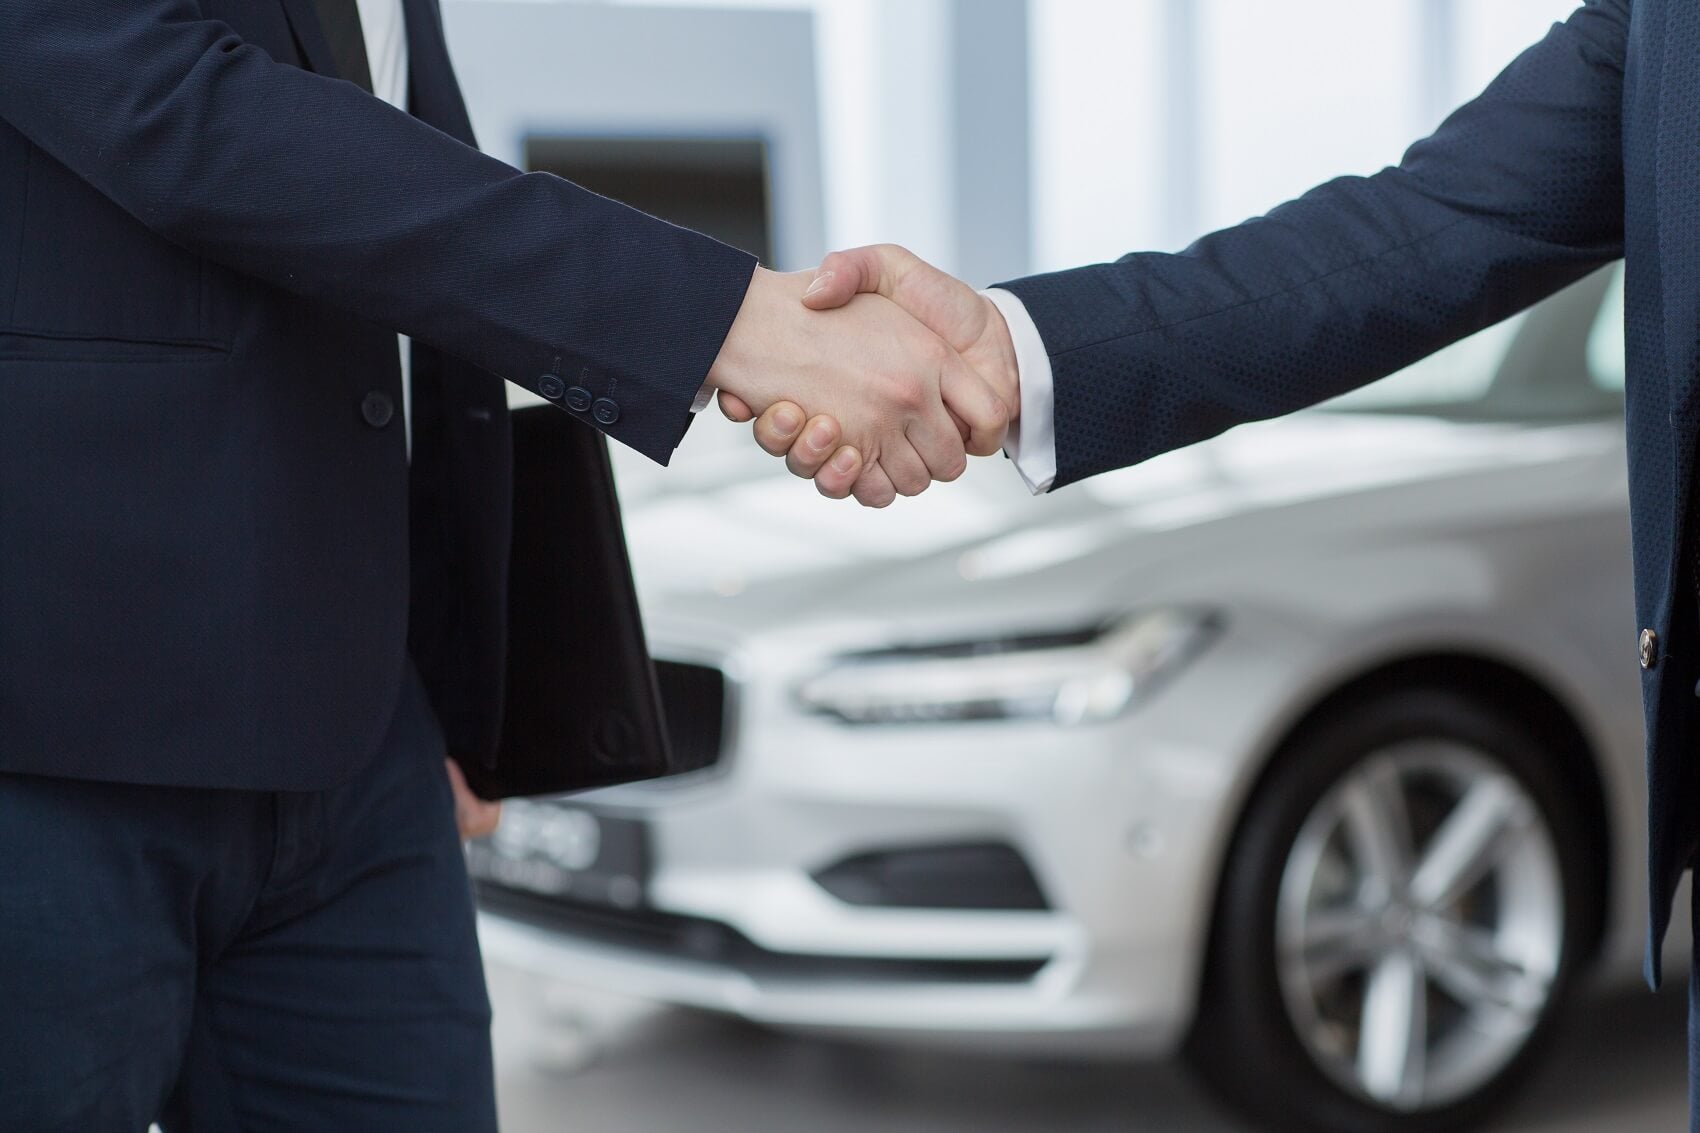 Used Cars vs Certified Pre-Owned Cars
